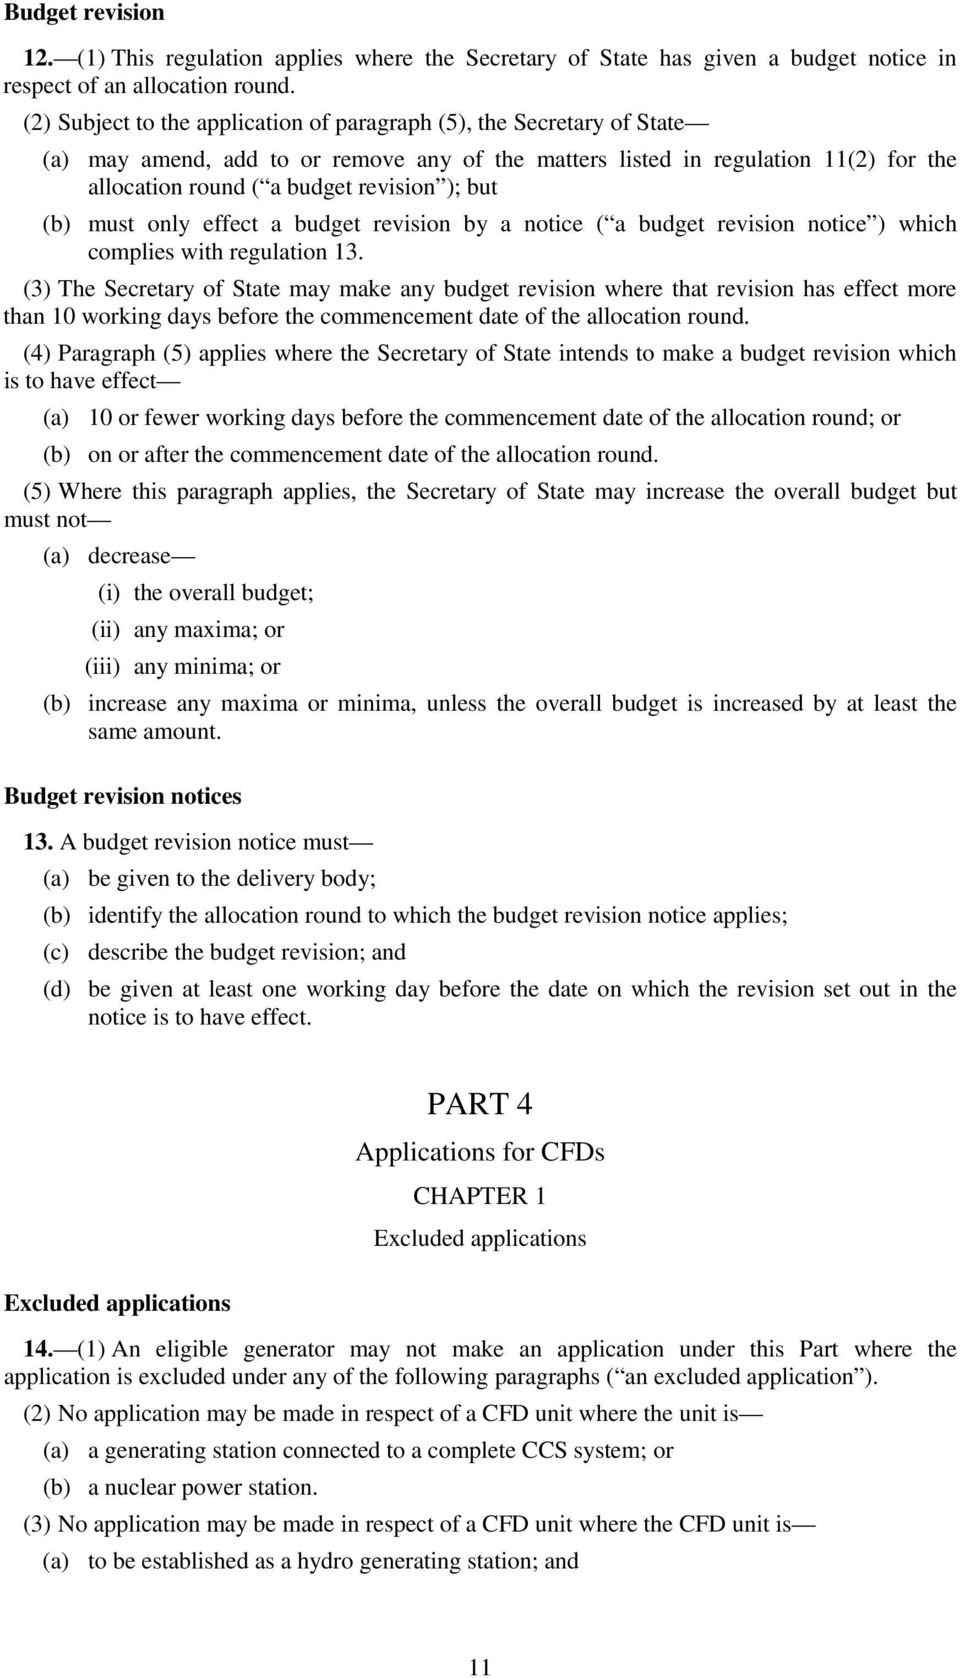 but (b) must only effect a budget revision by a notice ( a budget revision notice ) which complies with regulation 13.